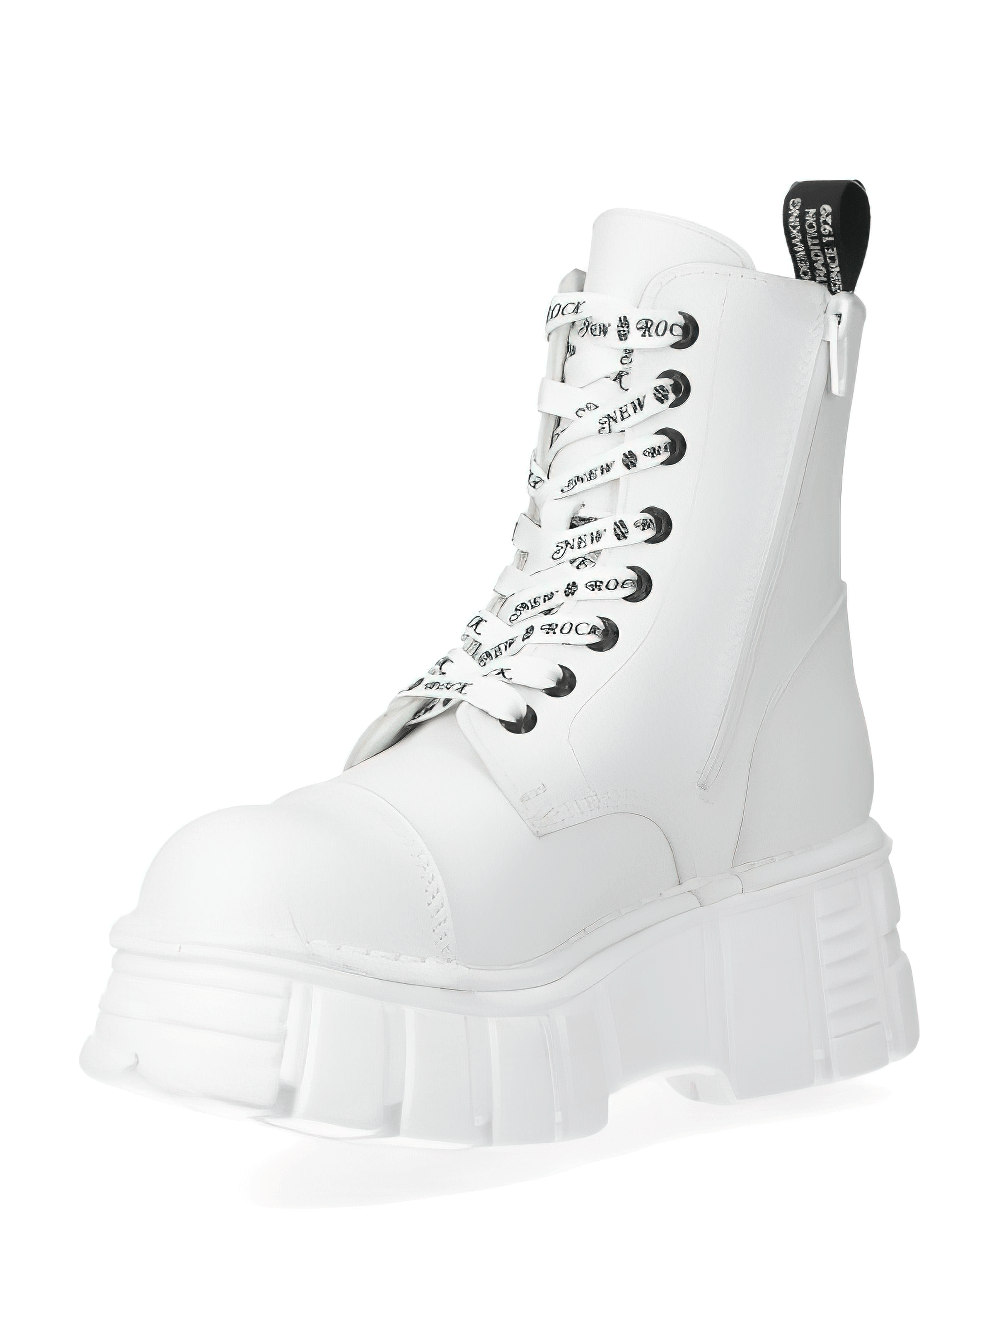 NEW ROCK Edgy White Platform Boots with Punk Badges